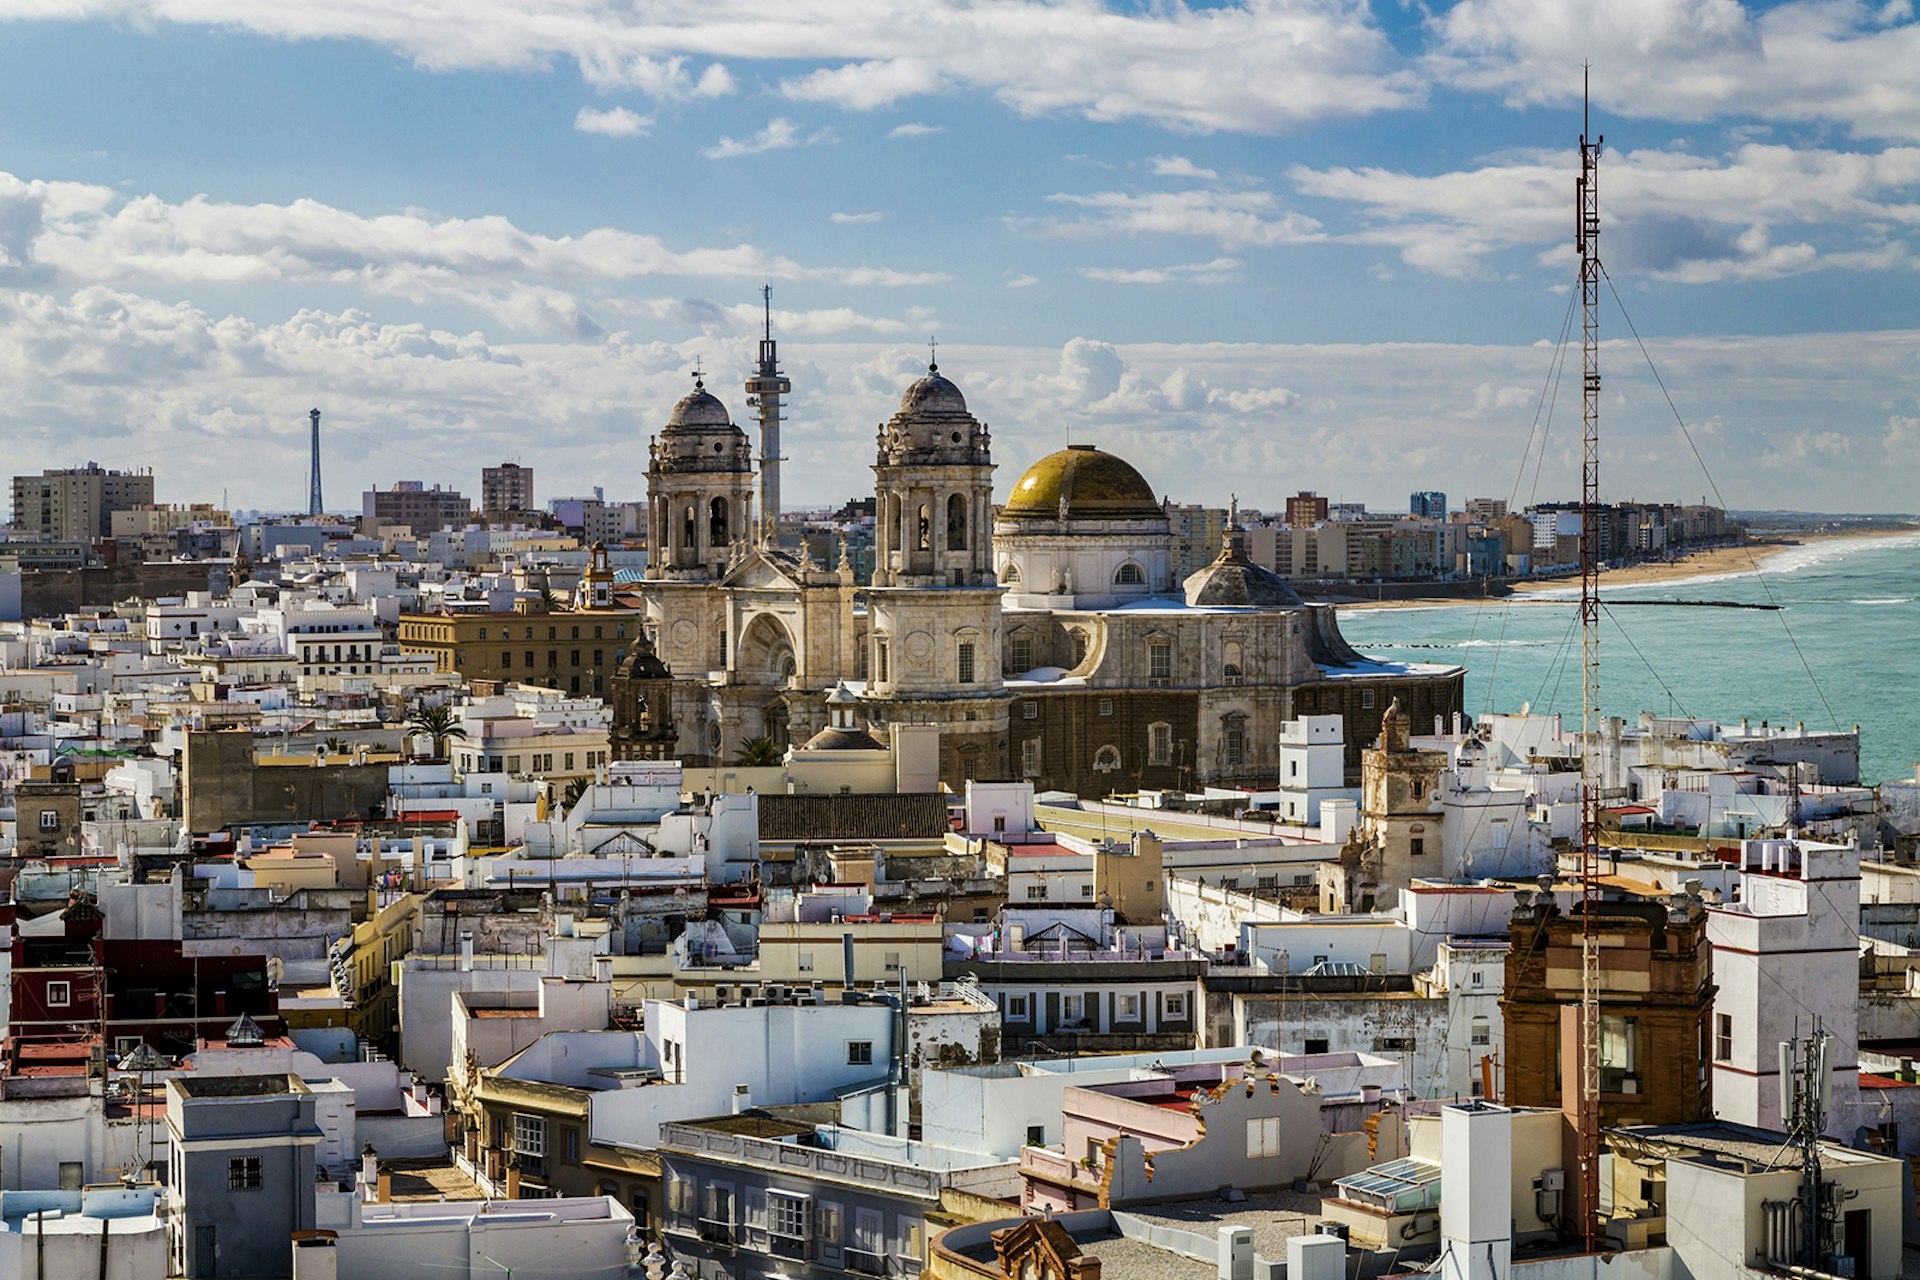 An aerial view of the city of Cádiz. The sea is visible, and the skyline is punctuated by a historic cathedral. Spain.